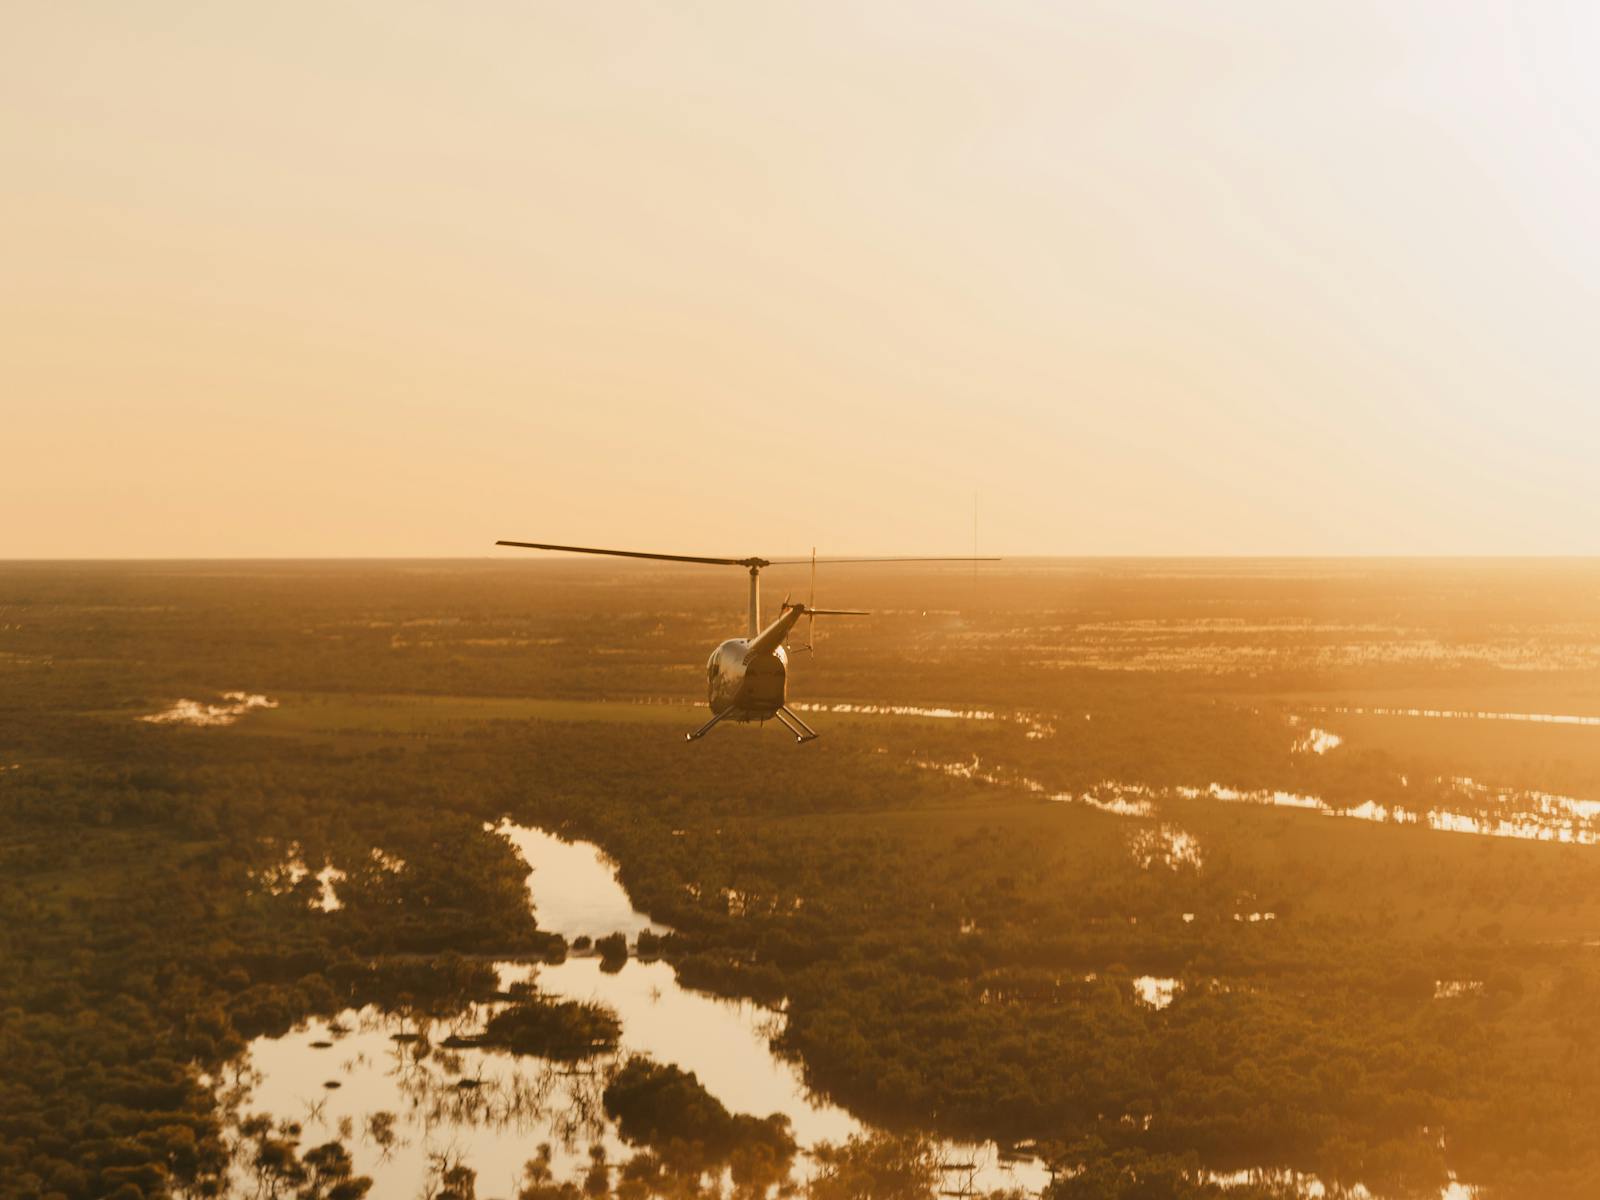 Our R44 helicopter soaring above Thomson river channel country at sunset